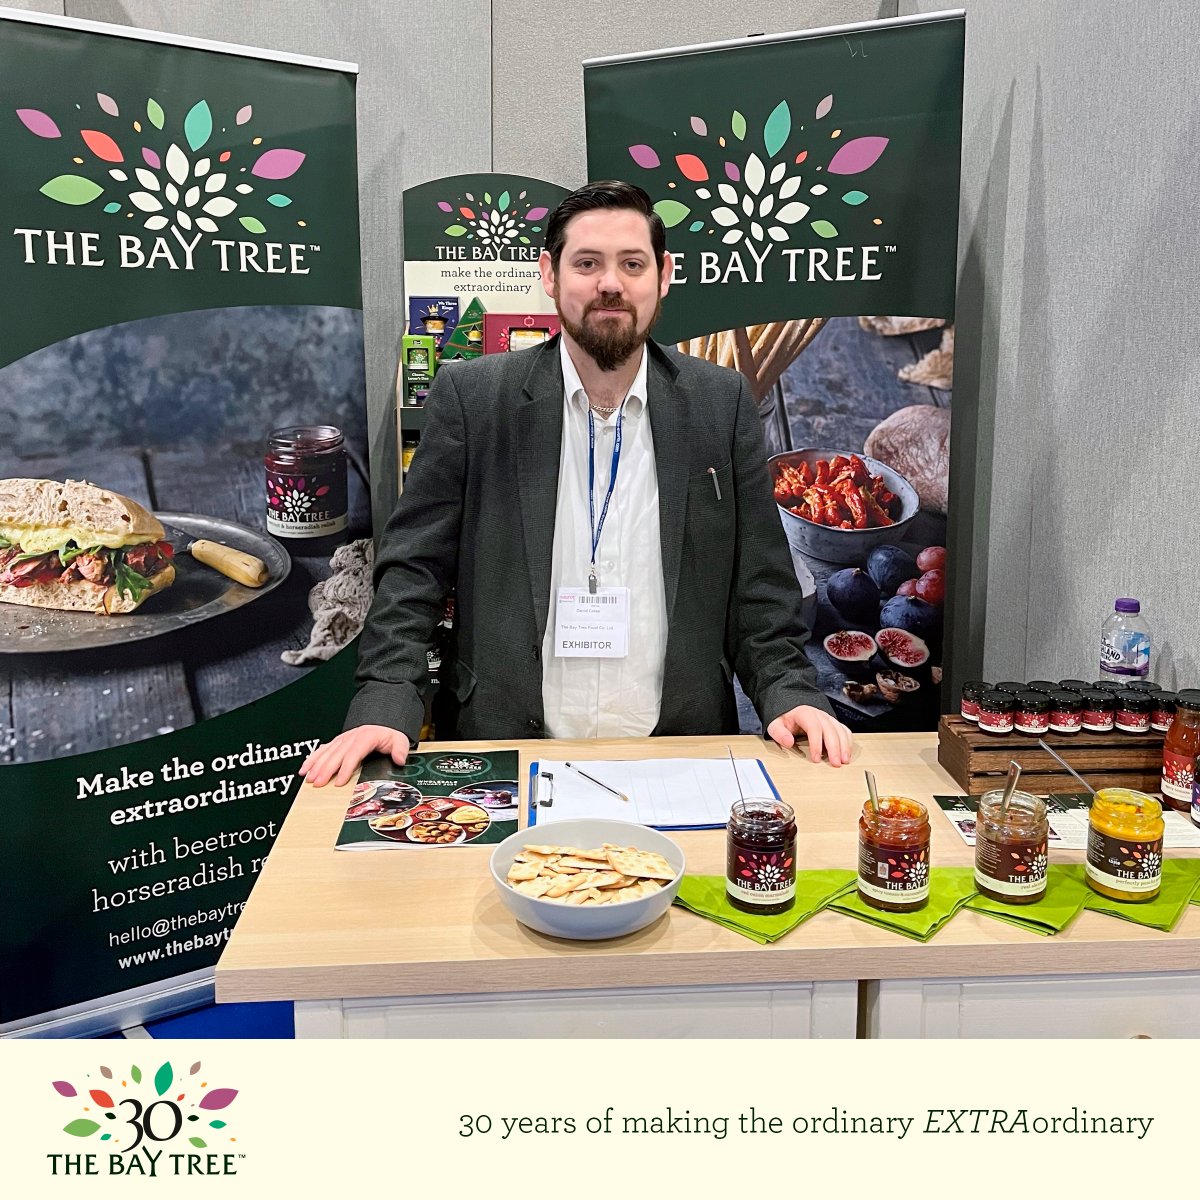 𝐒𝐖𝐄𝐄𝐓, 𝐙𝐈𝐍𝐆𝐘, & 𝐕𝐄𝐑𝐒𝐀𝐓𝐈𝐋𝐄. Meet Dave. If you're at The Source Trade Show at Westpoint, ask Dave about our range of condiments, preserves sauces and more. #wholesale #foodservice #tradeshow @FoodDrinkDevon @SourceFoodDrink